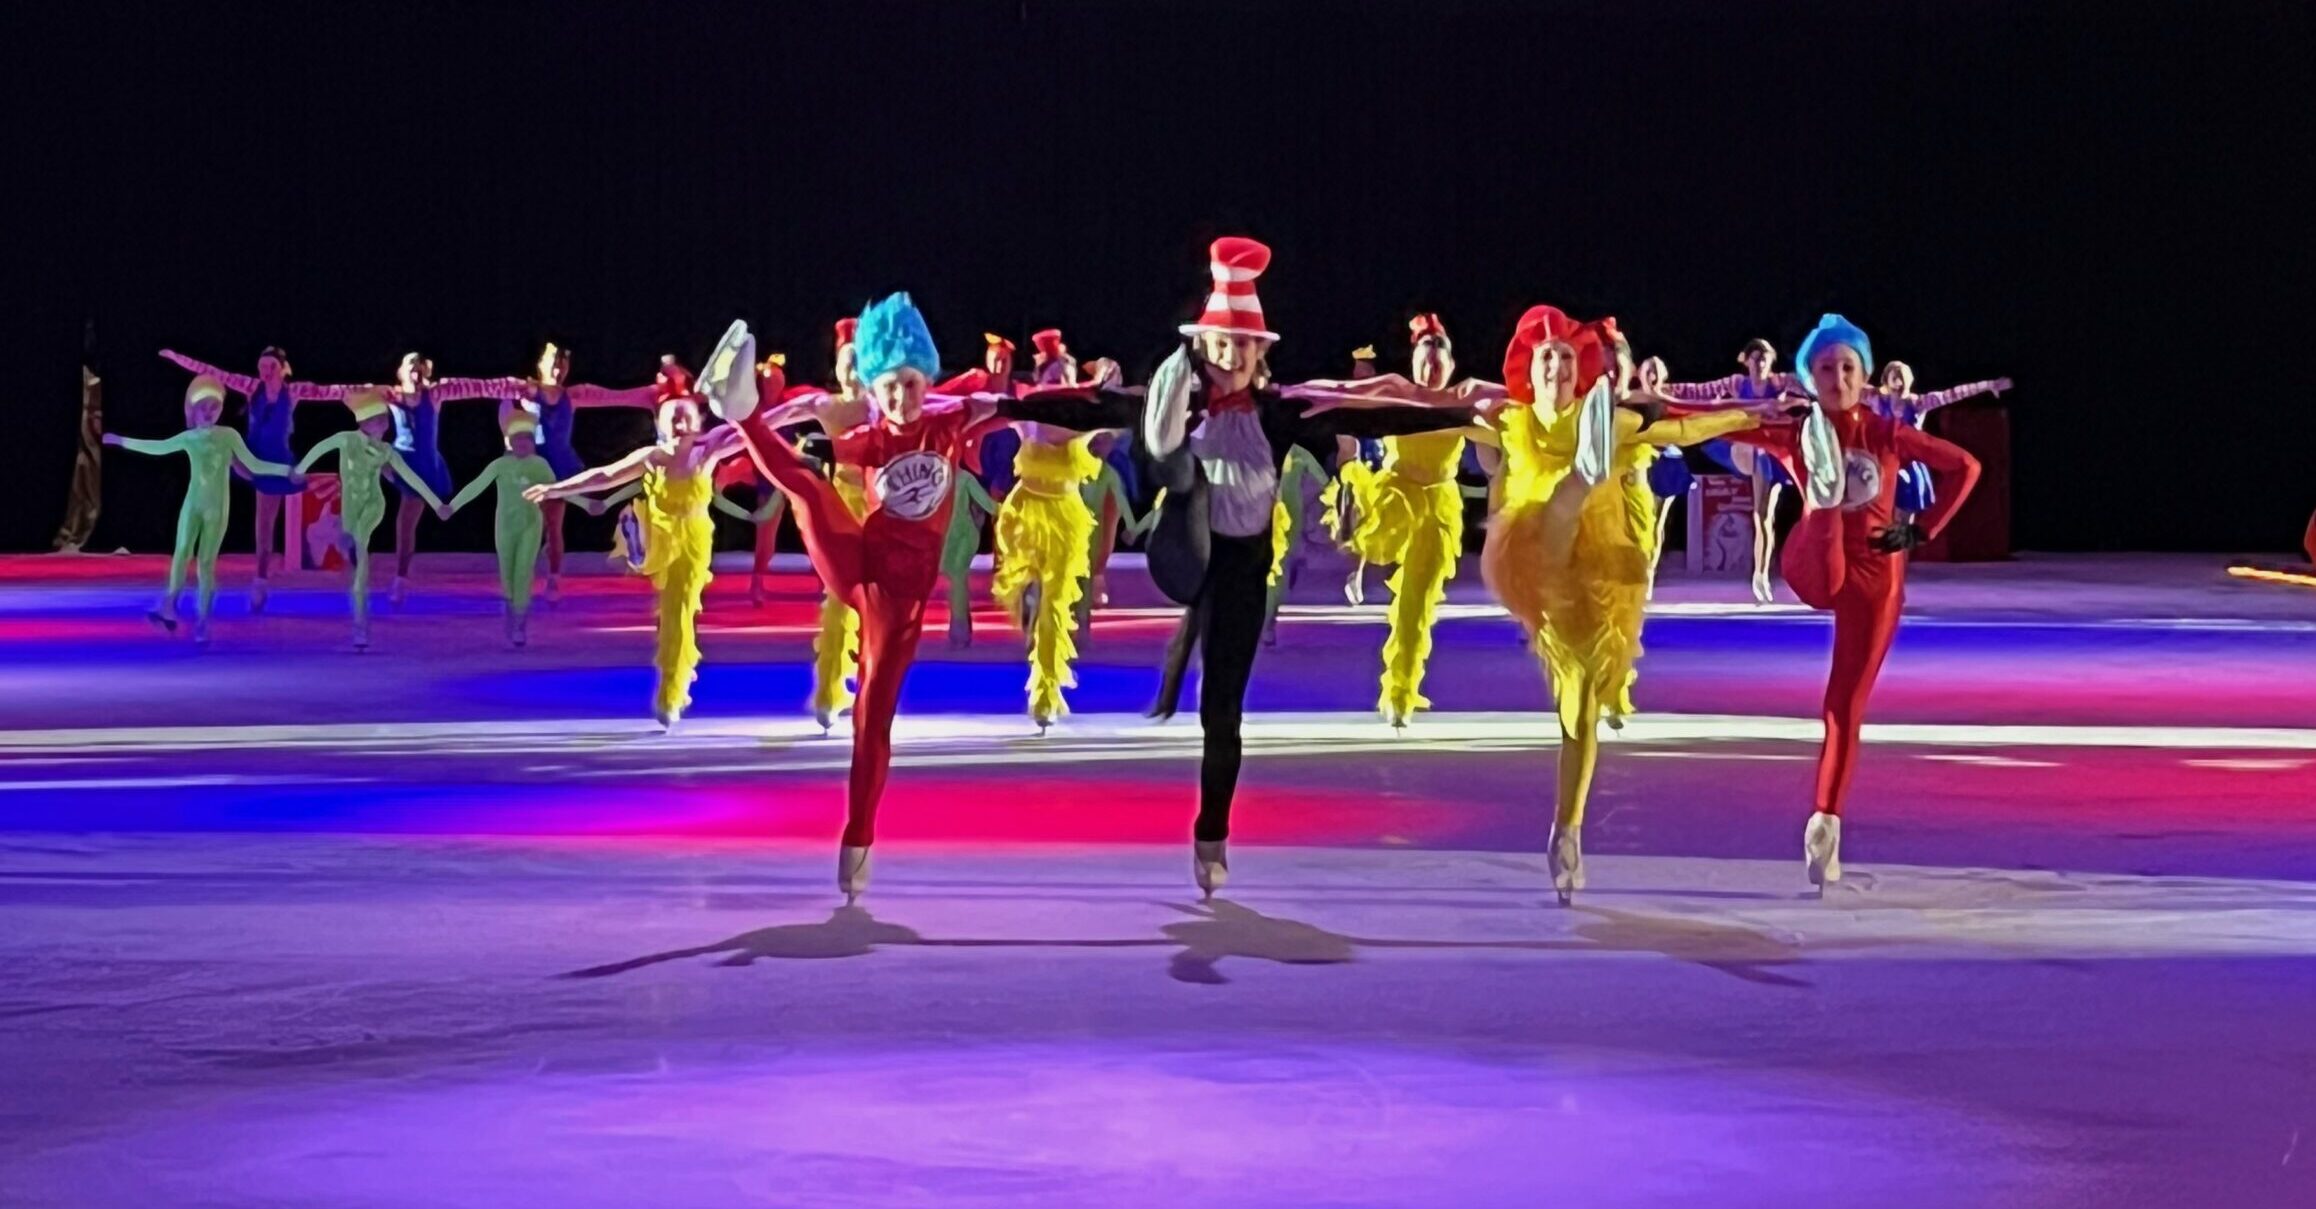 A Group of Skaters in Color Costume Performing on Ice